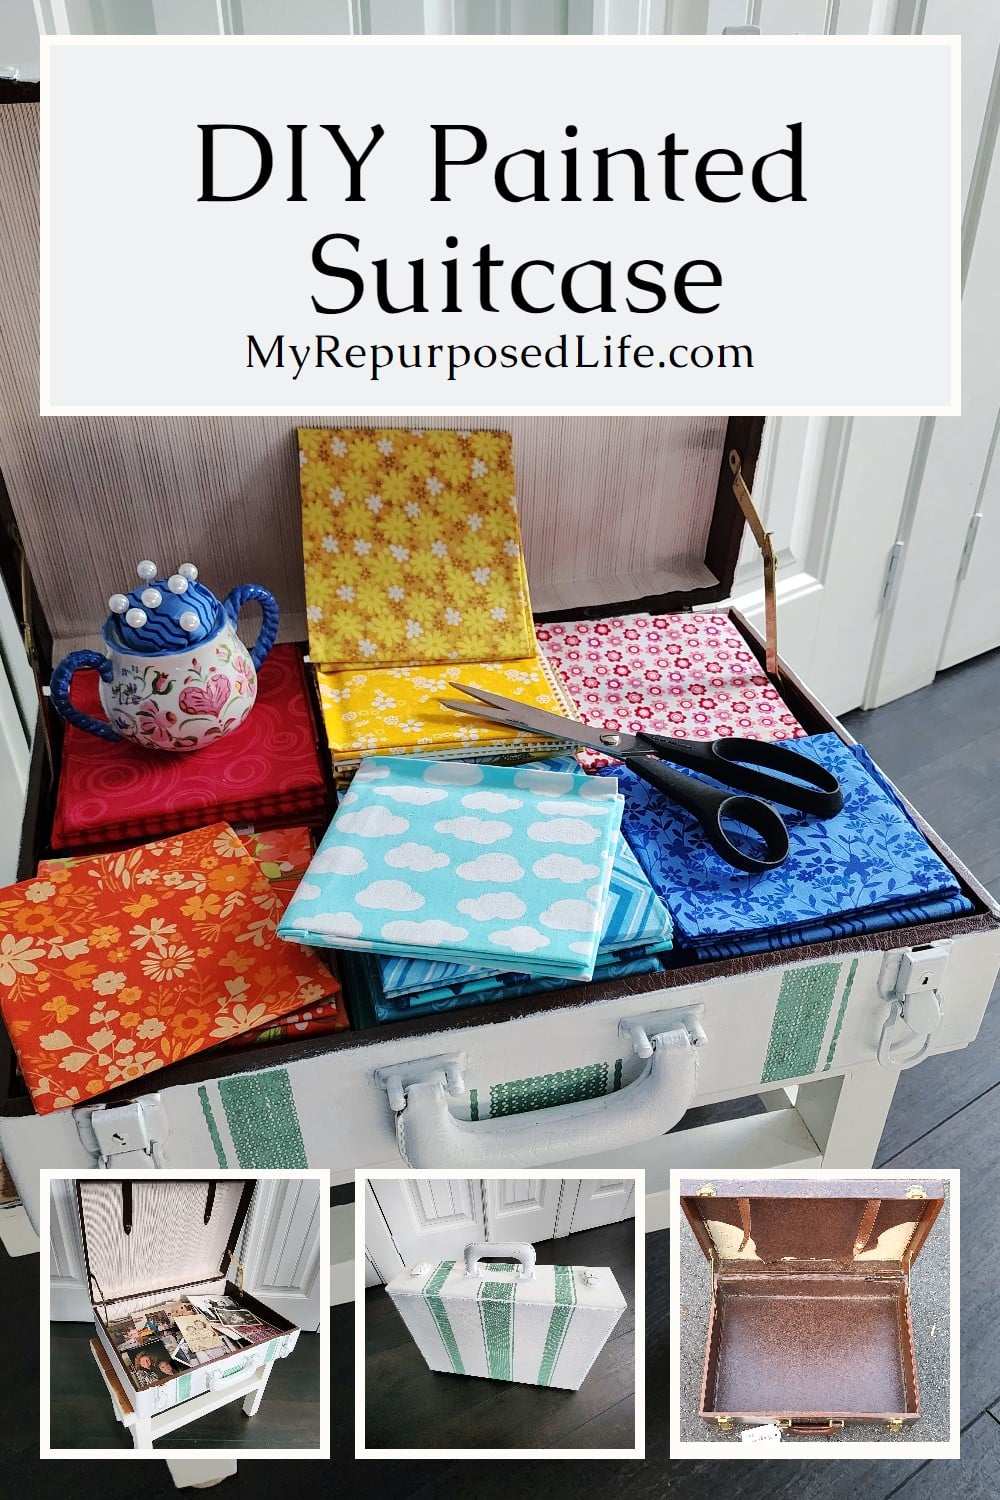 A DIY painted suitcase is perfect for storing sewing or craft supplies. It's a great way to keep old photos handy for sharing. You can even make a pet bed. A dozen ways to use a suitcase as storage and decor. #MyRepurposedLife via @repurposedlife